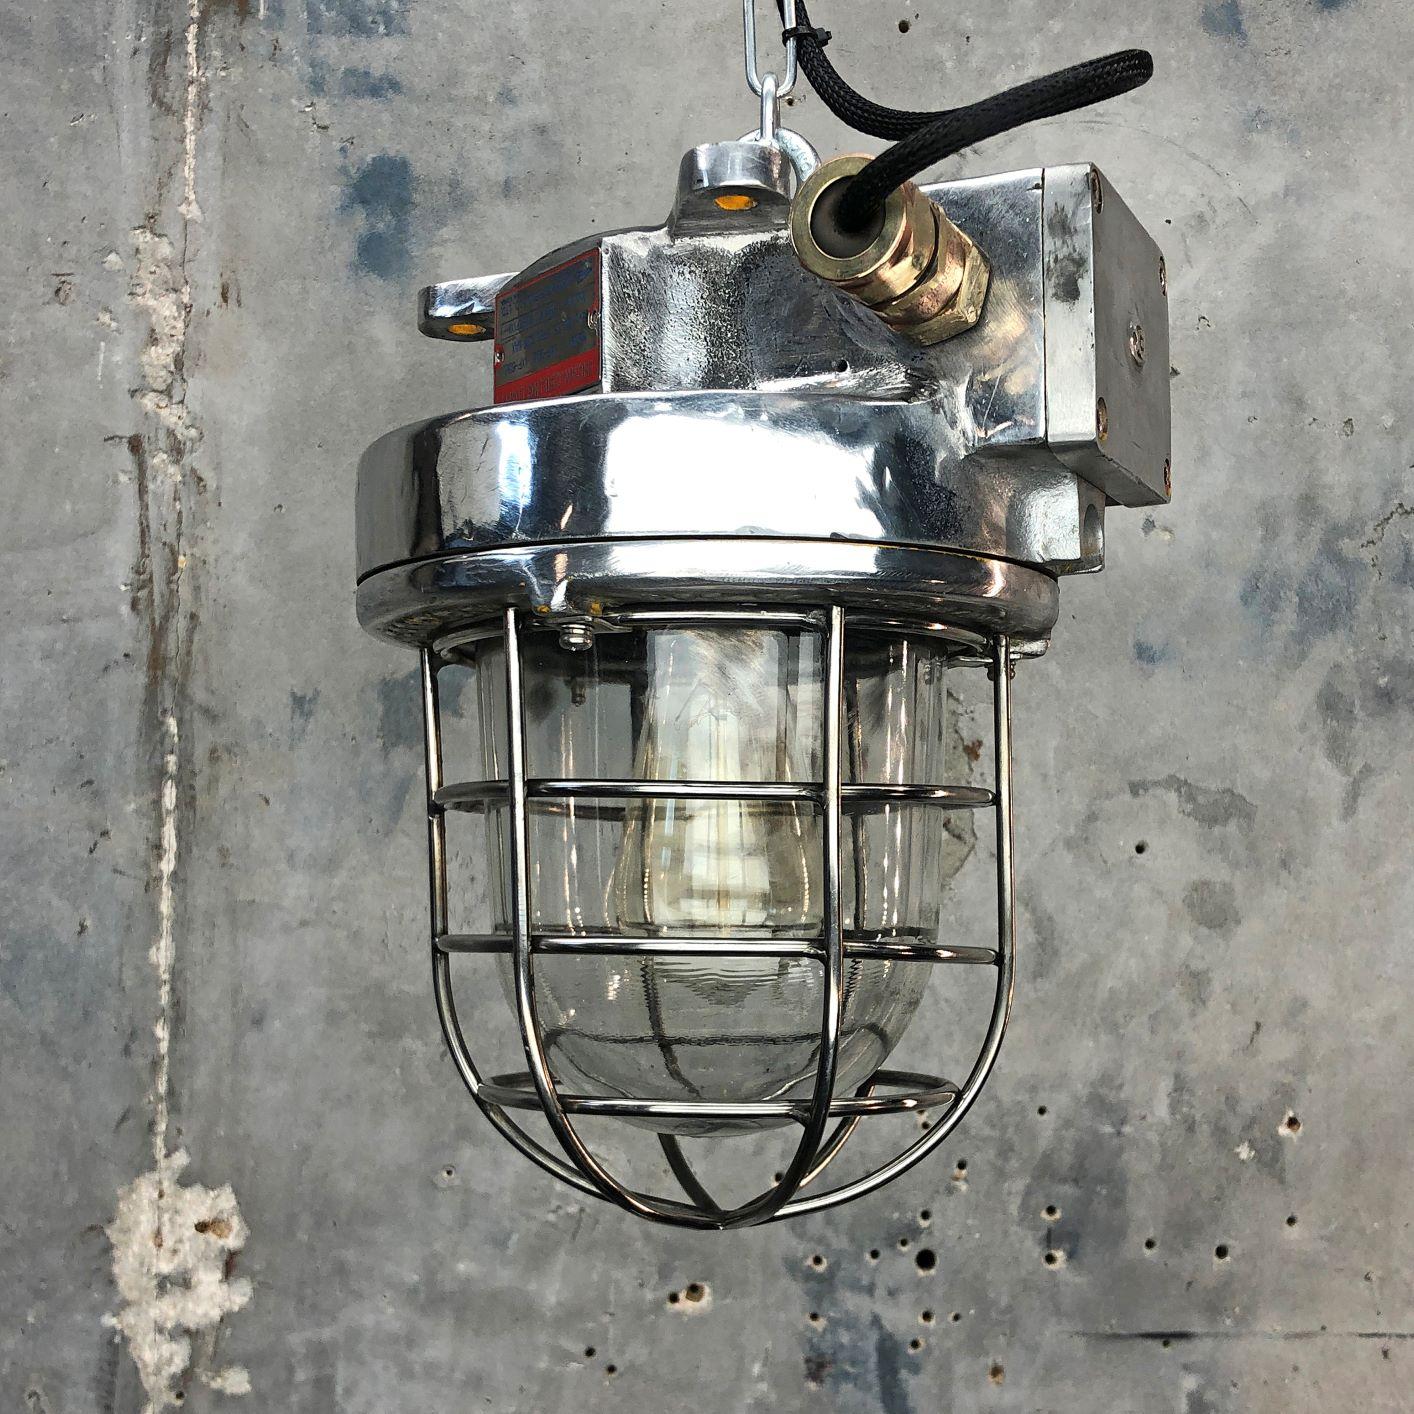 A late century Korean Industrial cast aluminum ceiling pendant with explosion proof glass dome and cage by Kukdong Elecom. It is rated IP66 which means this can be used outside or in wet zones. 

Professionally restored by hand in the UK by